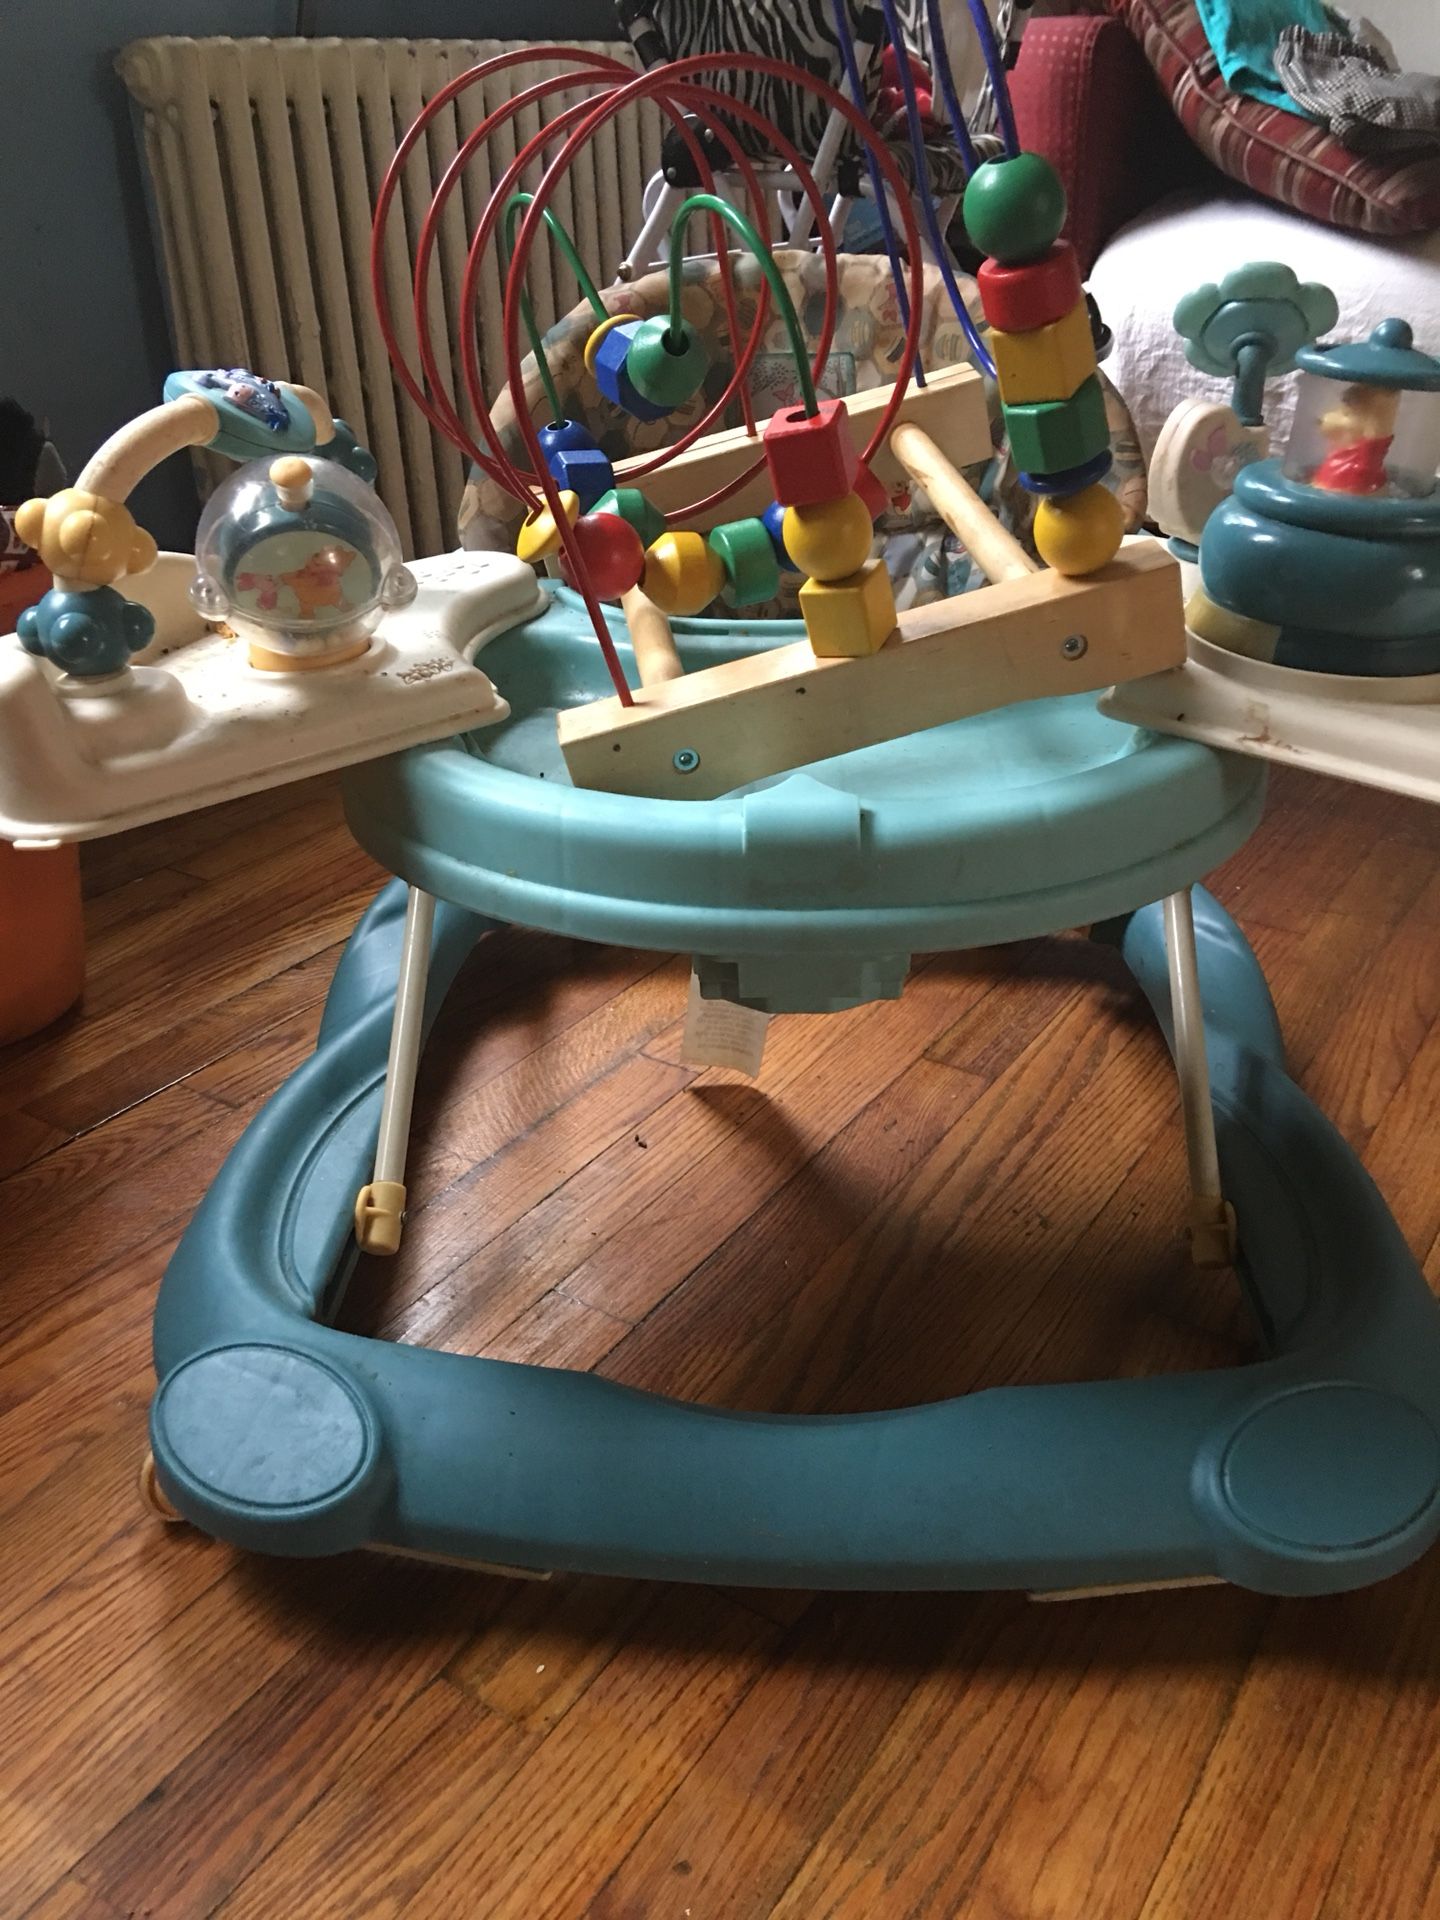 Baby walk and the toy